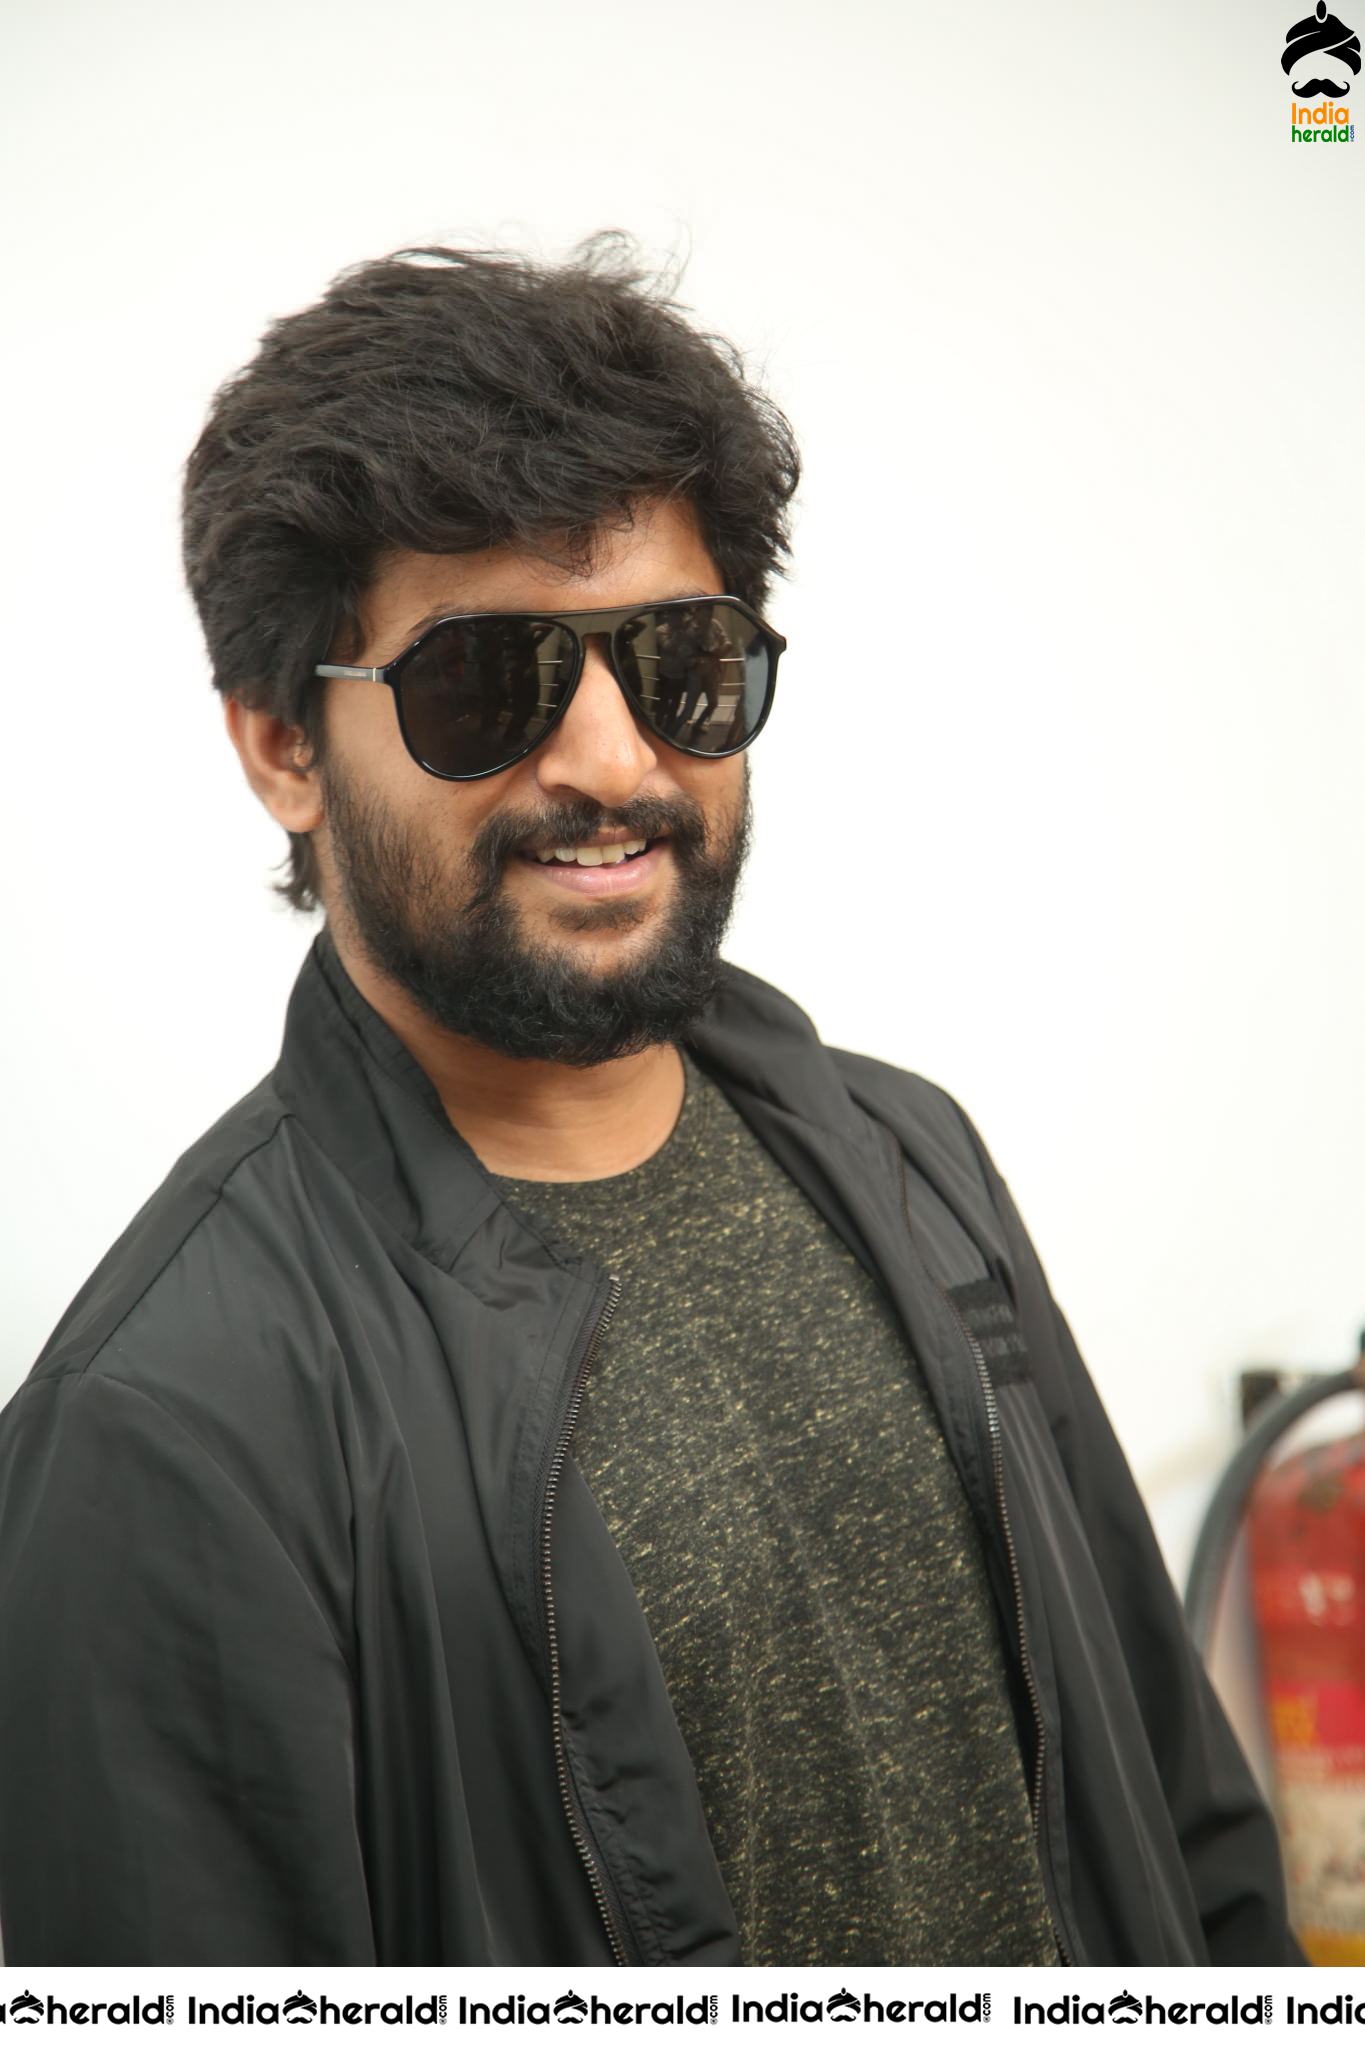 Actor Nani Looking Smart and Suave in these Photos